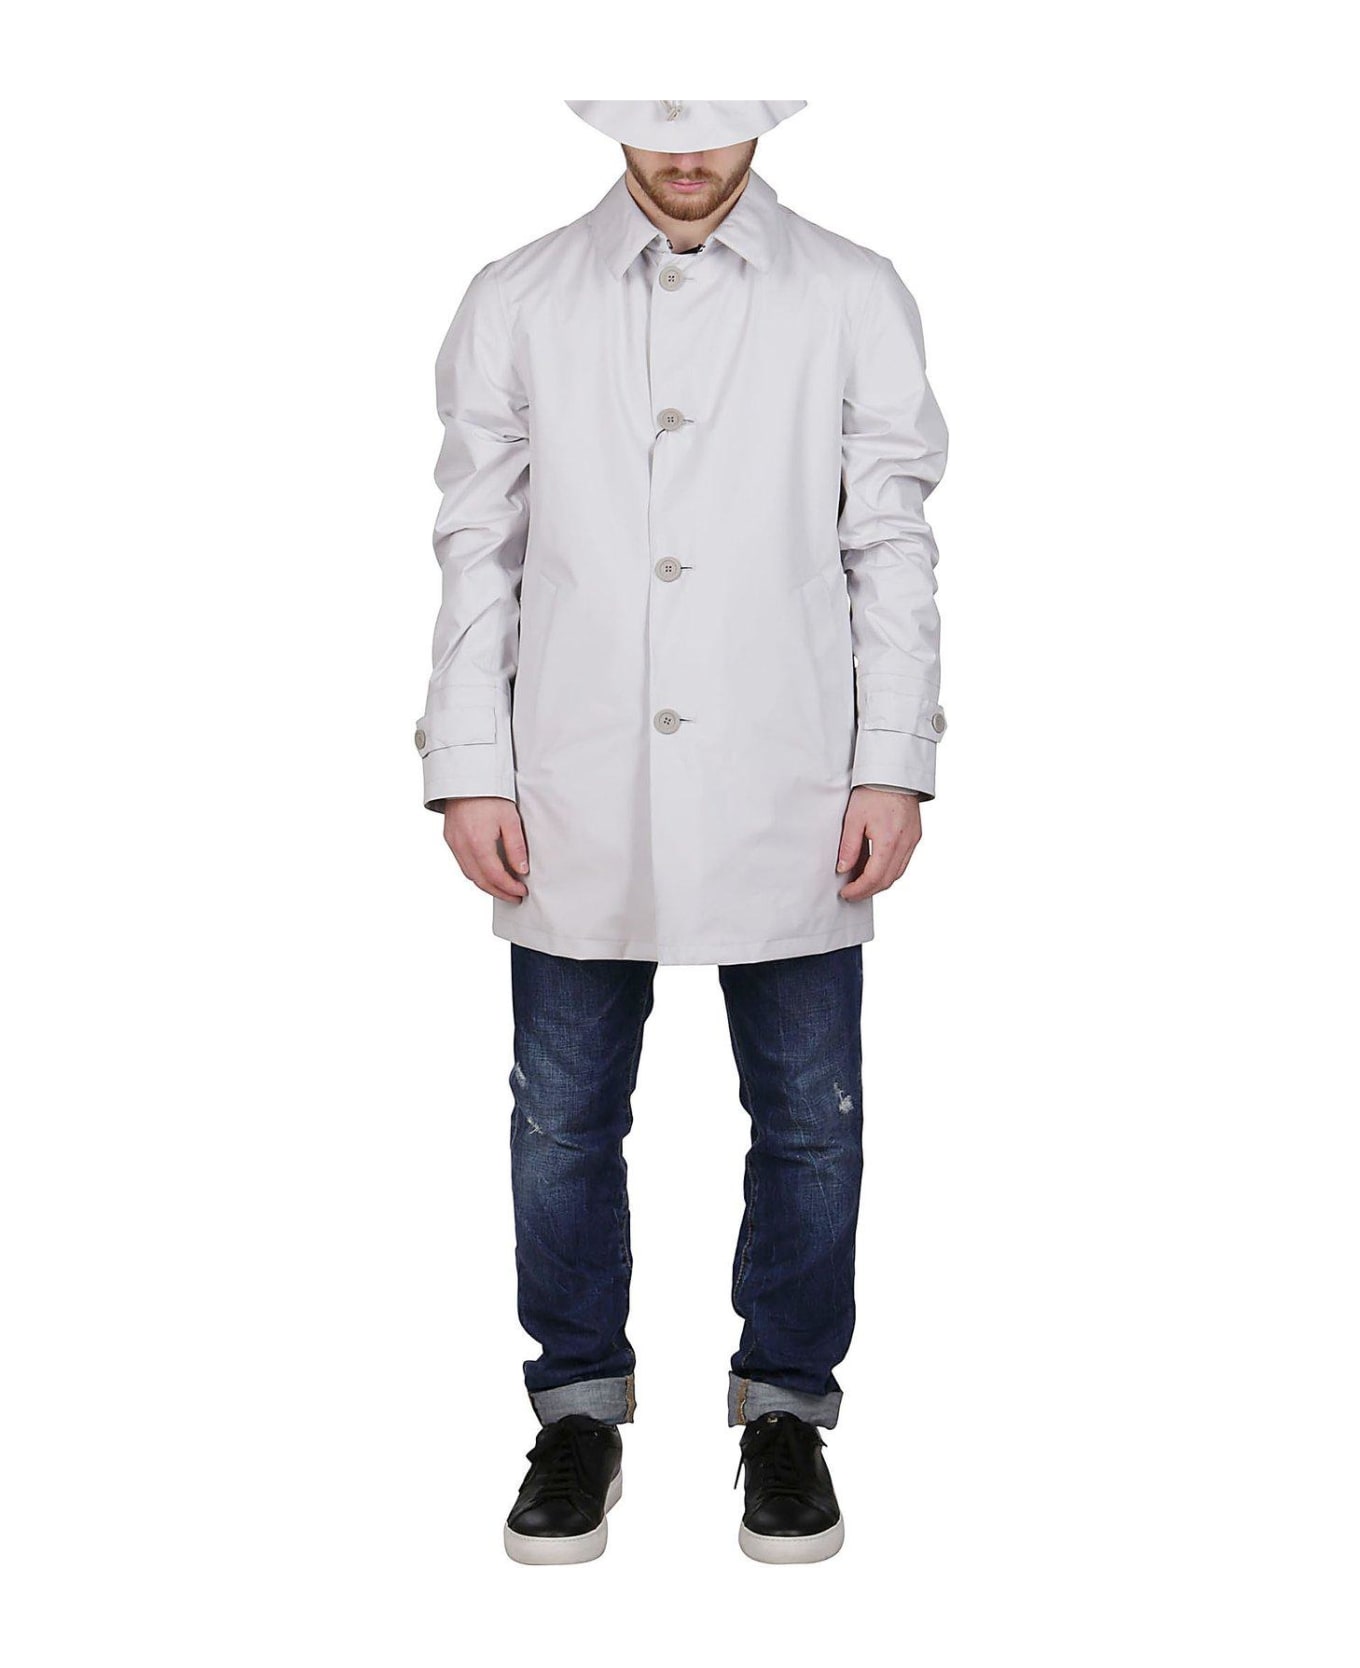 Herno Buttoned Shirt Jacket - GREY